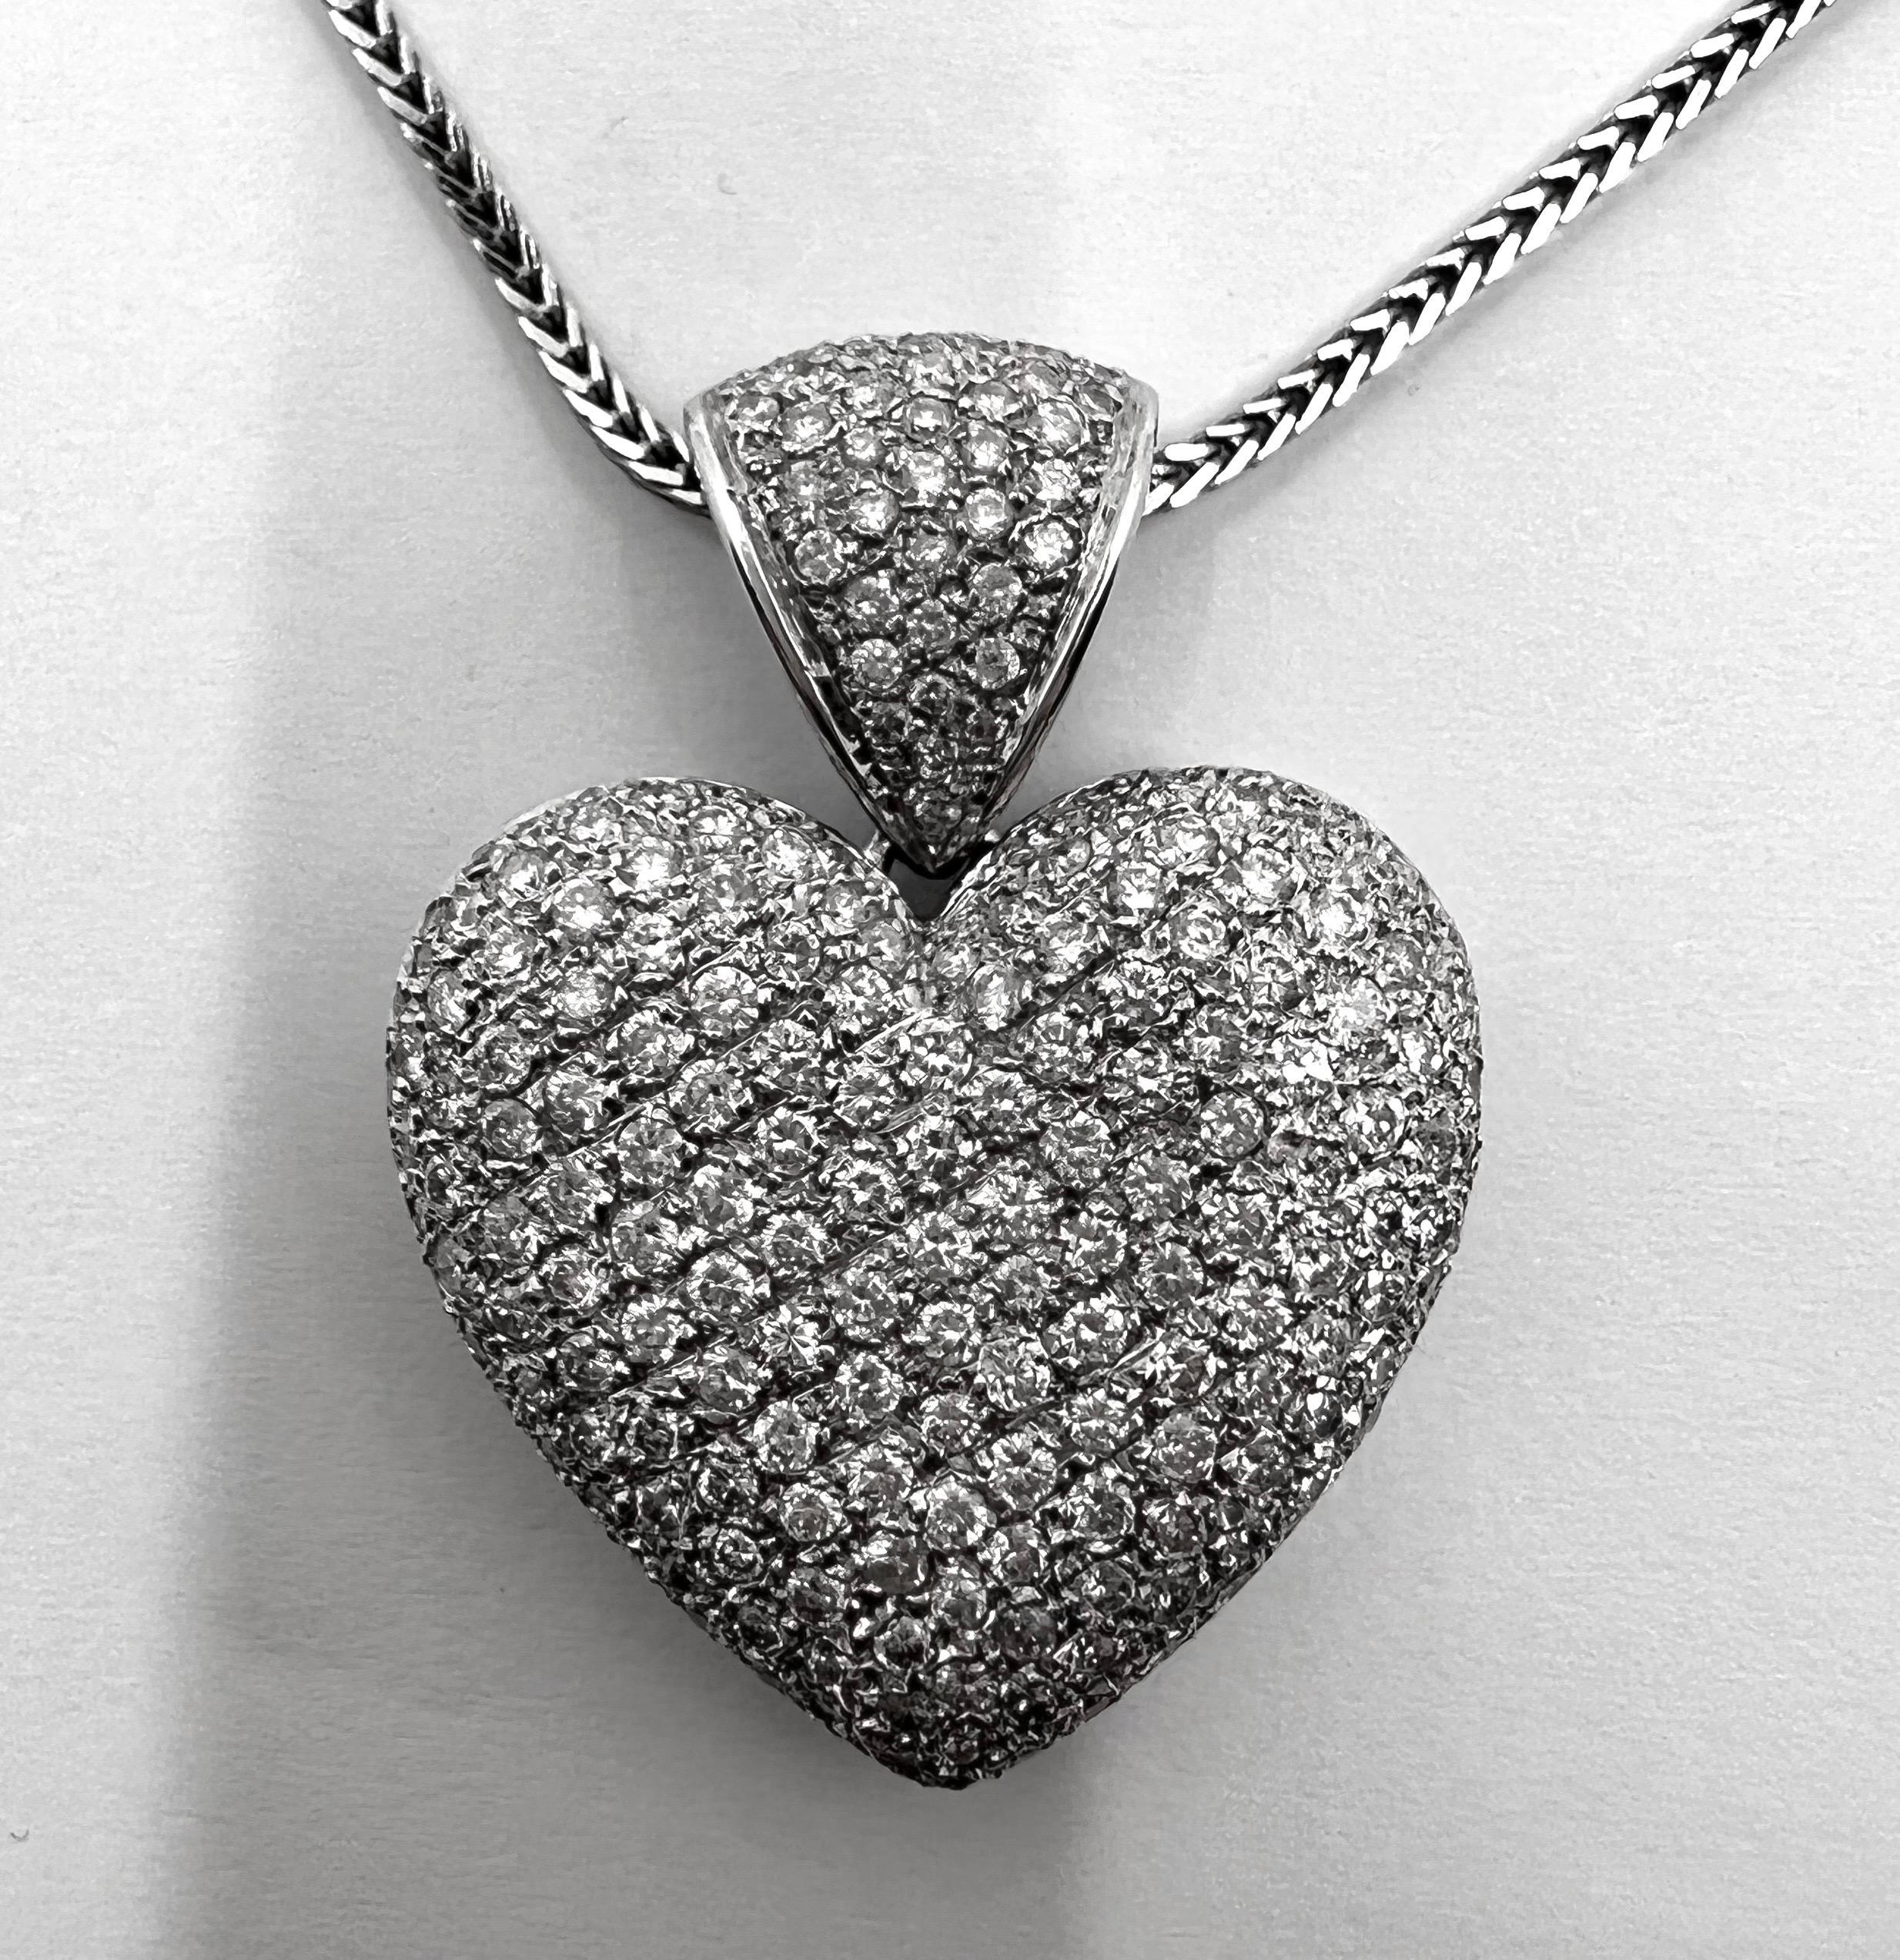 Women's or Men's Heart Necklace in diamonds (Approx. 7 carats) and white Gold For Sale